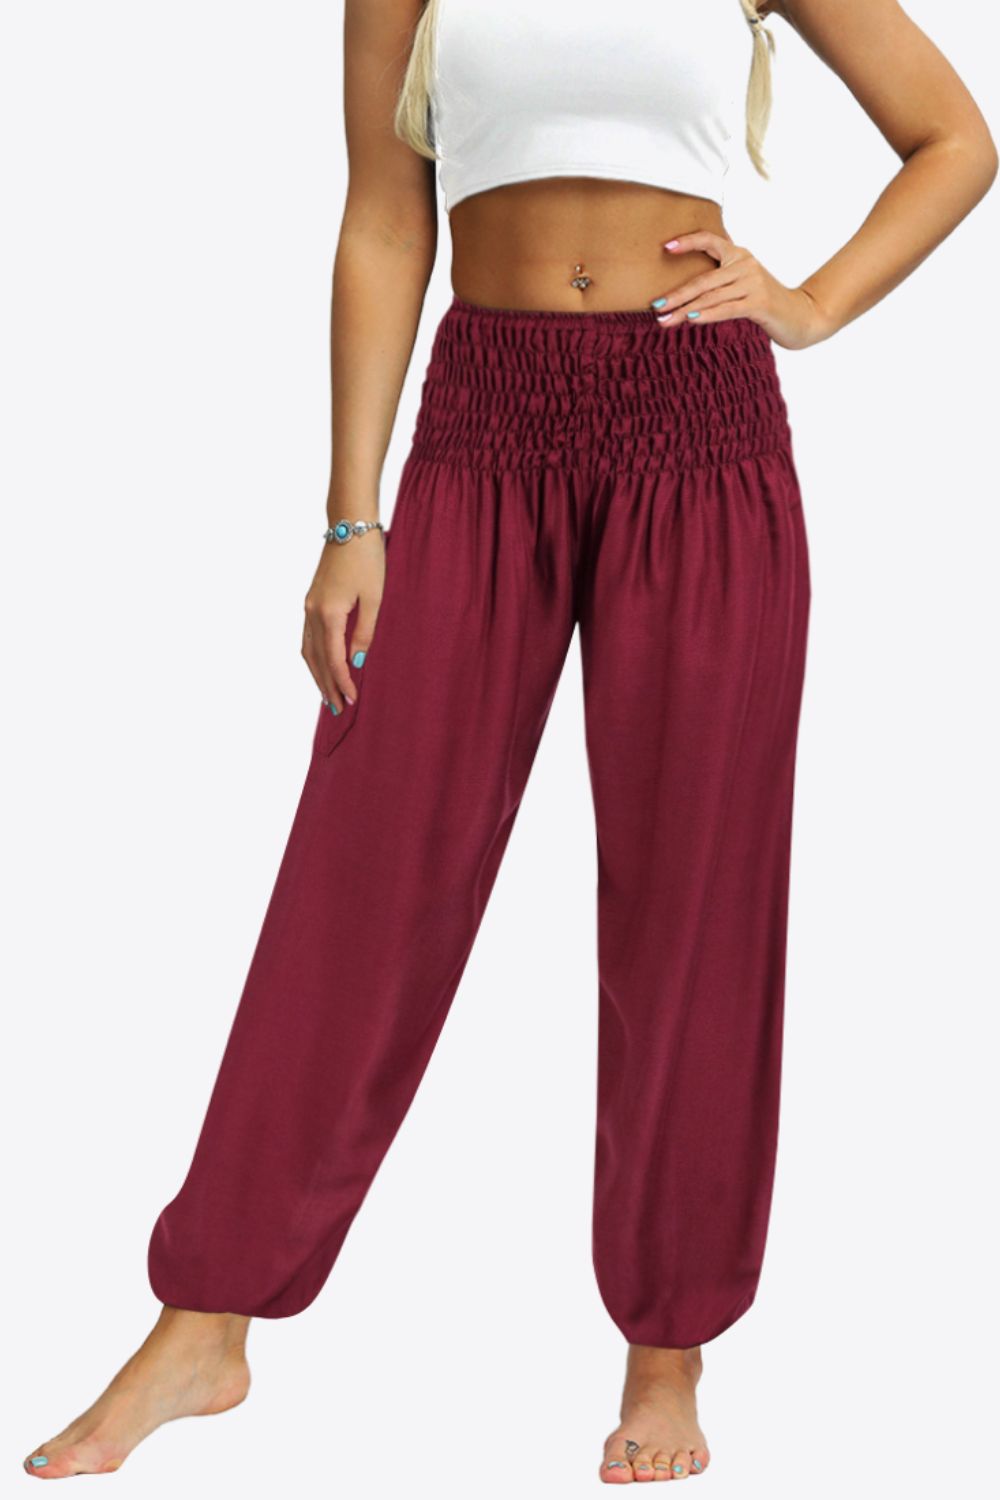 Smocked Joggers with Pockets - Red / S - Bottoms - Pants - 13 - 2024